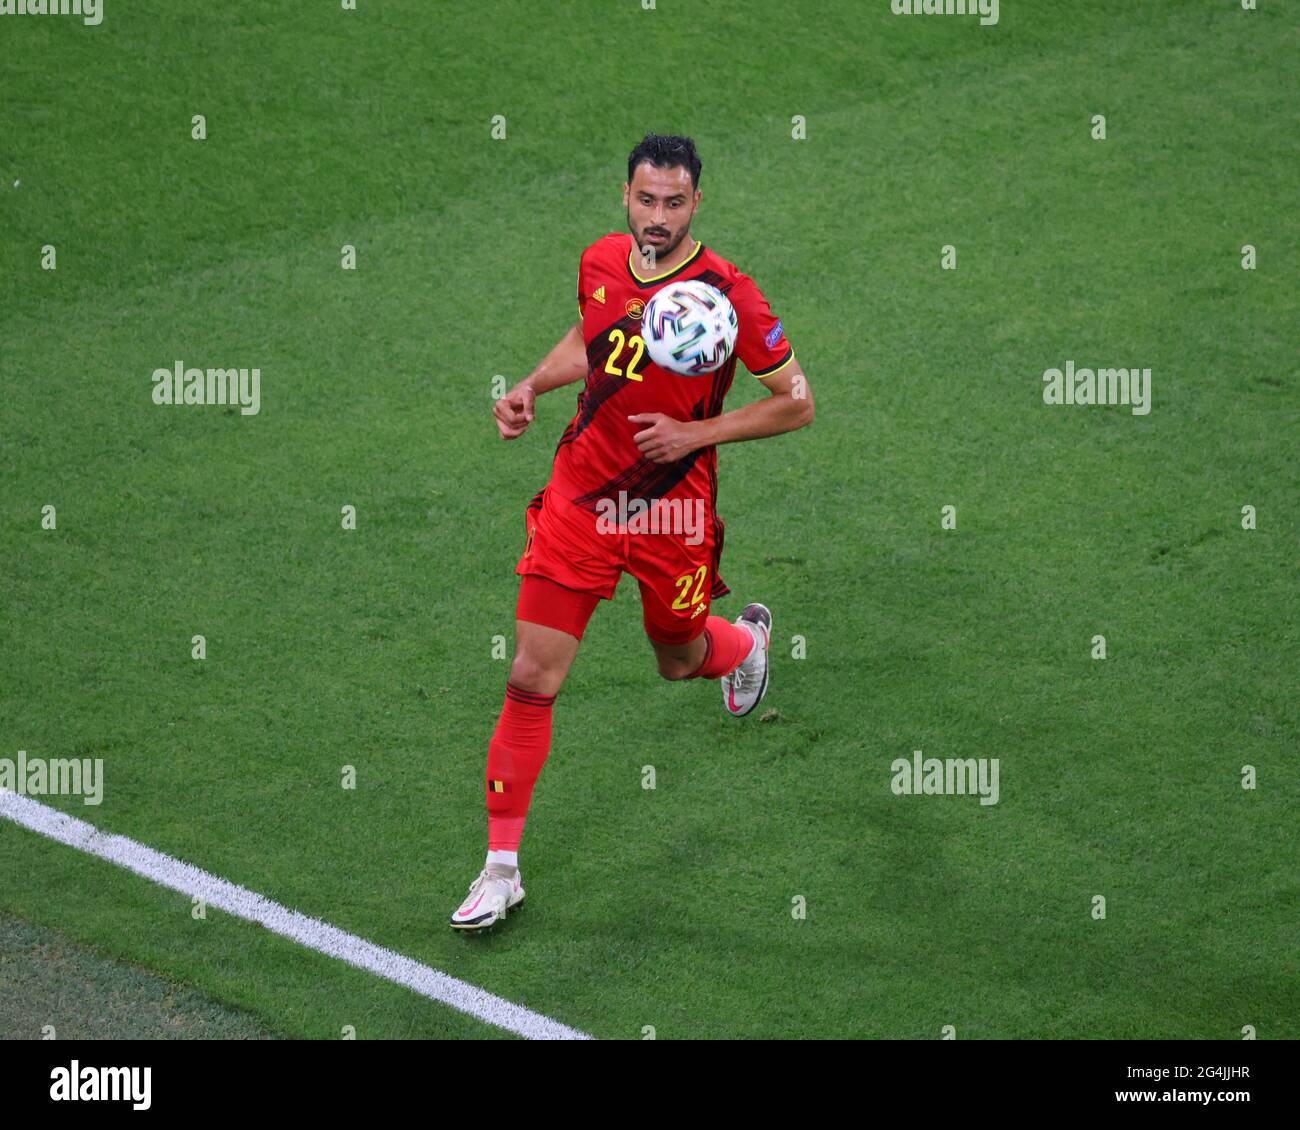 Saint Petersburg, Russia. 21st June, 2021. Nacer Chadli (22) of Belgium seen in action during the European championship EURO 2020 between Belgium and Finland at Gazprom Arena.(Final Score; Finland 0:2 Belgium). Credit: SOPA Images Limited/Alamy Live News Stock Photo